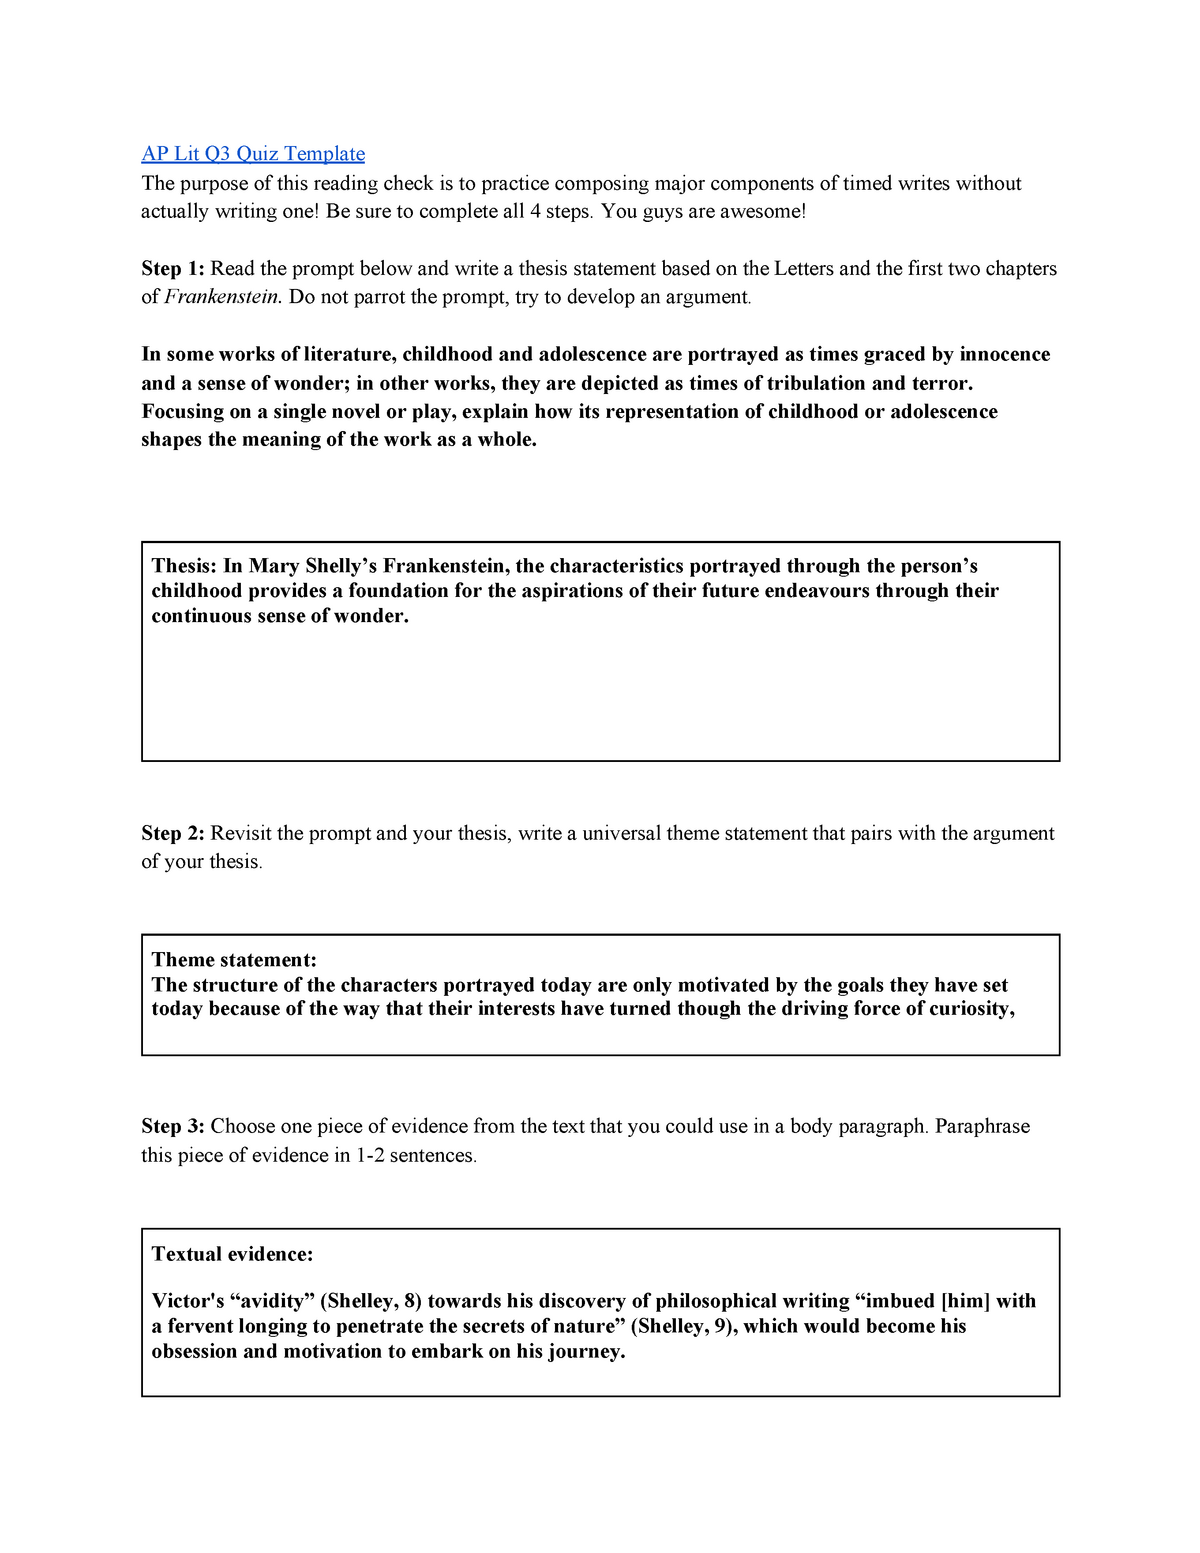 ap-lit-q3-quiz-template-2-ap-lit-q3-quiz-template-the-purpose-of-this-reading-check-is-to